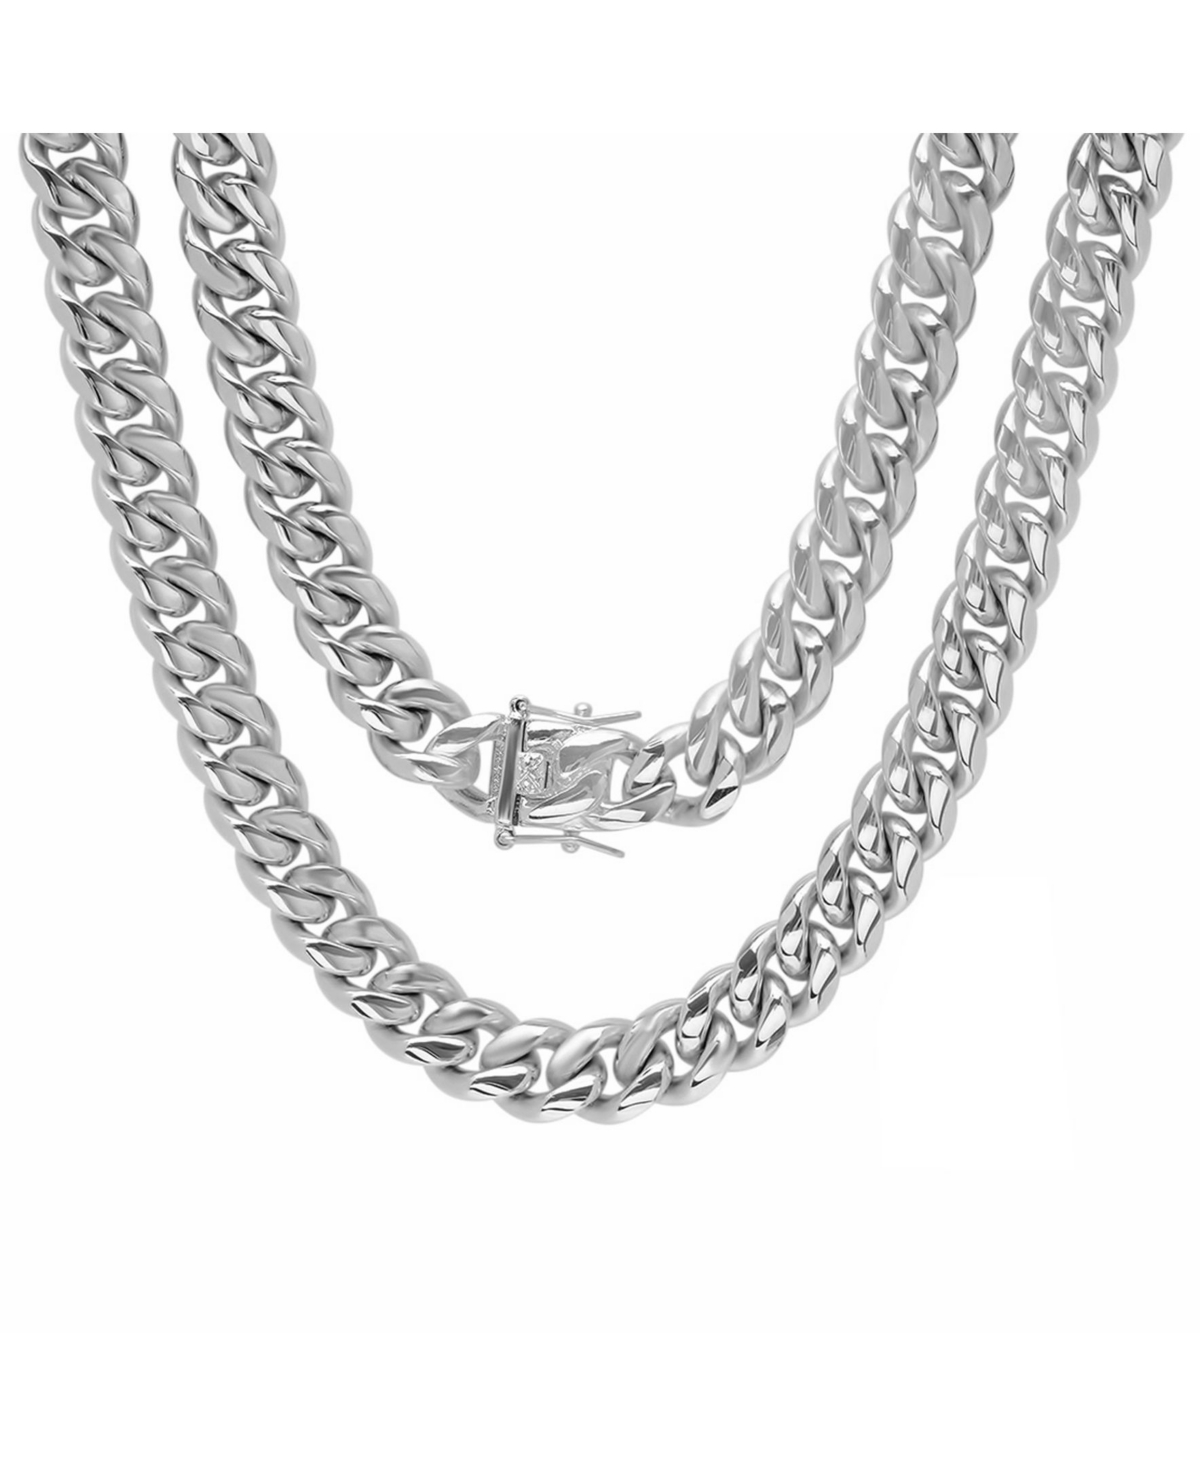 Men's Stainless Steel 24" Miami Cuban Link Chain with 12mm Box Clasp Necklaces - Silver